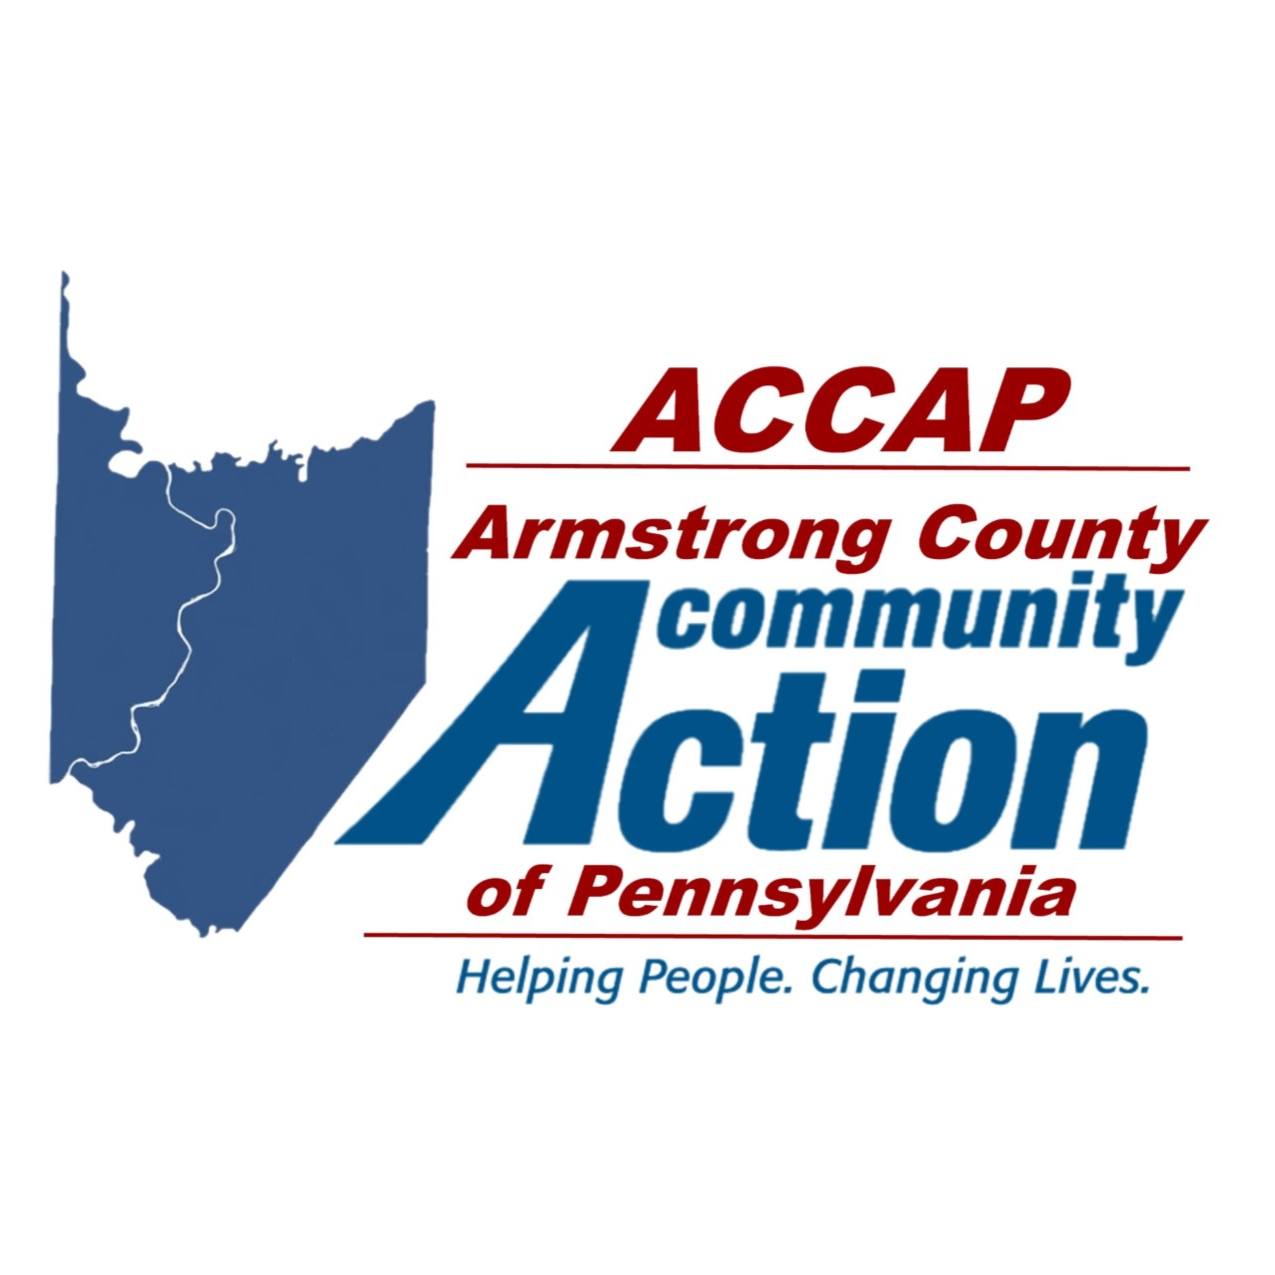 Armstrong County Emergency Food and Shelter Program - Community Action Program